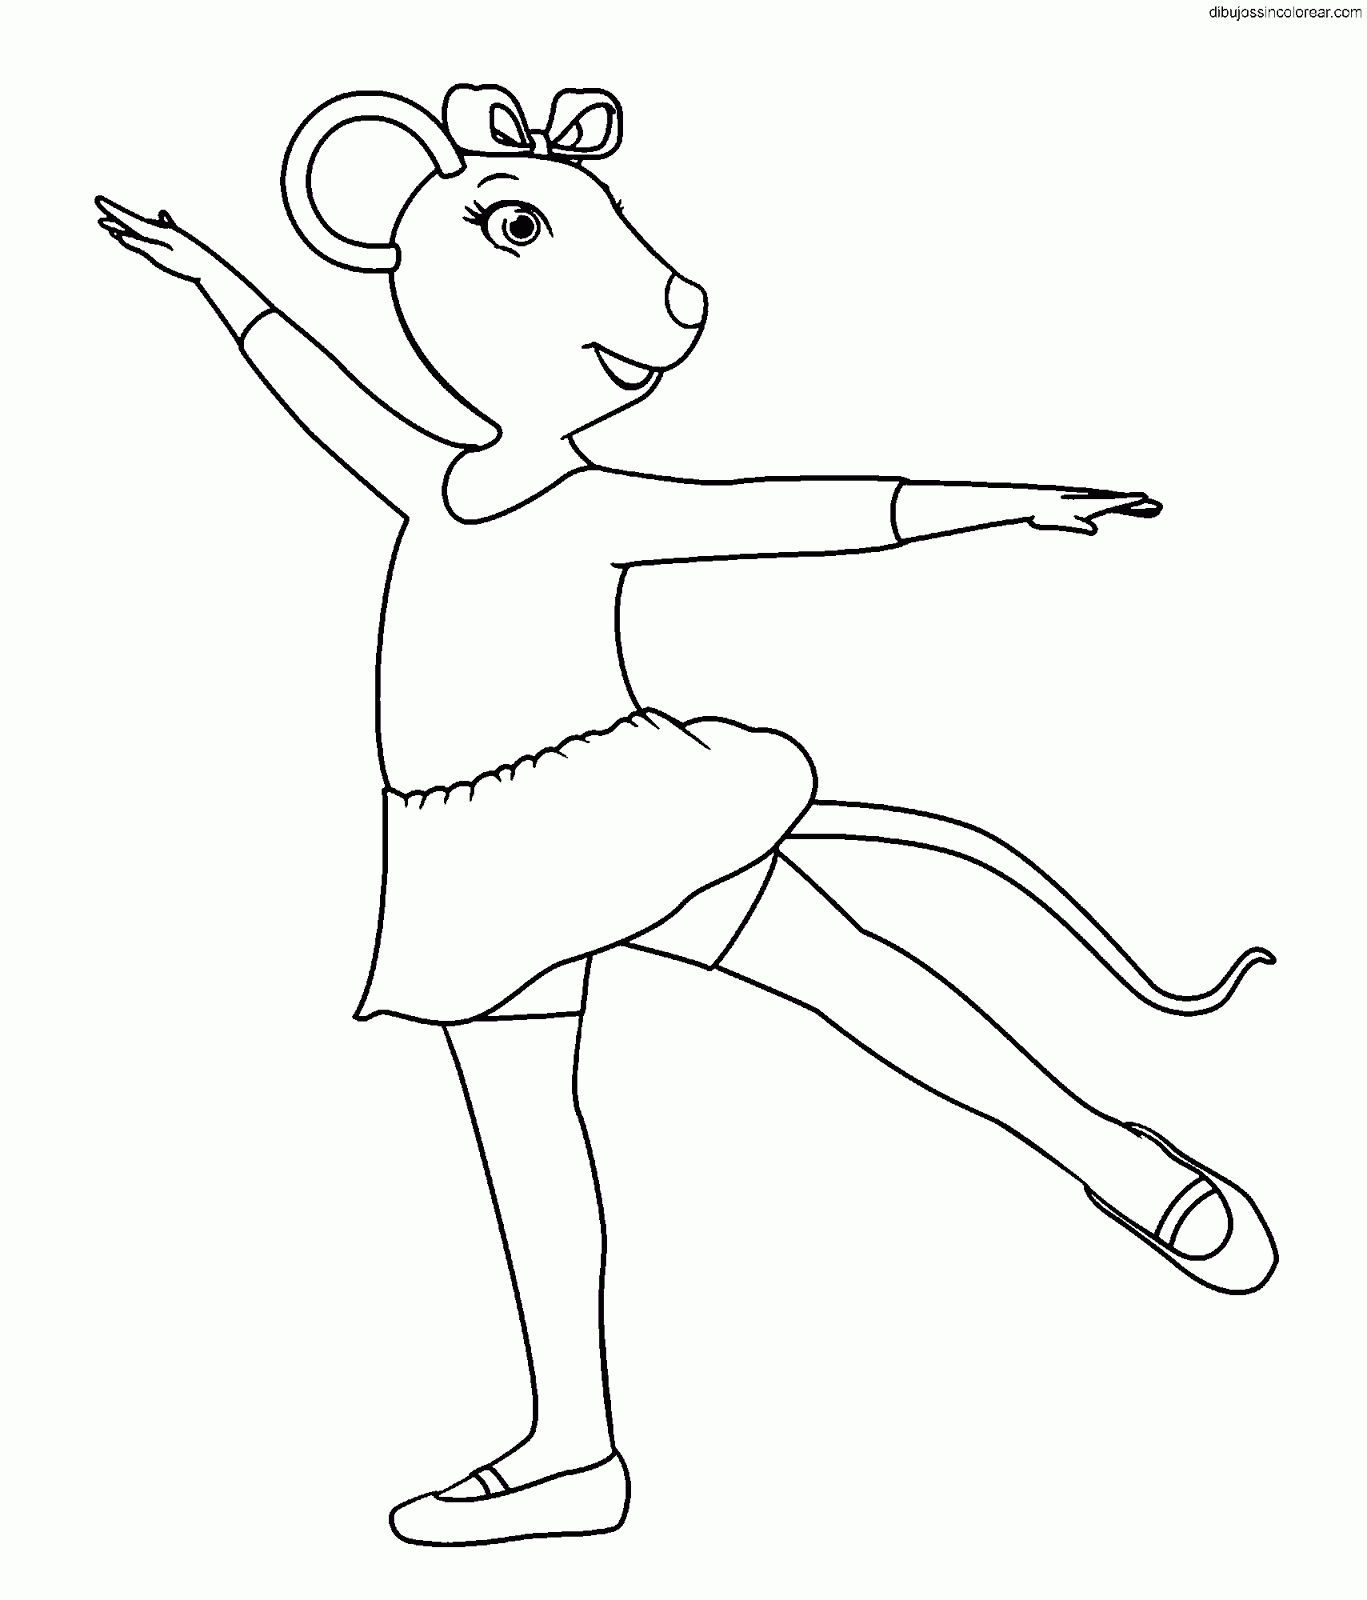 Printable Angelina Ballerina Coloring Pages Pdf - Free Angelina Ballerina Coloring Pages